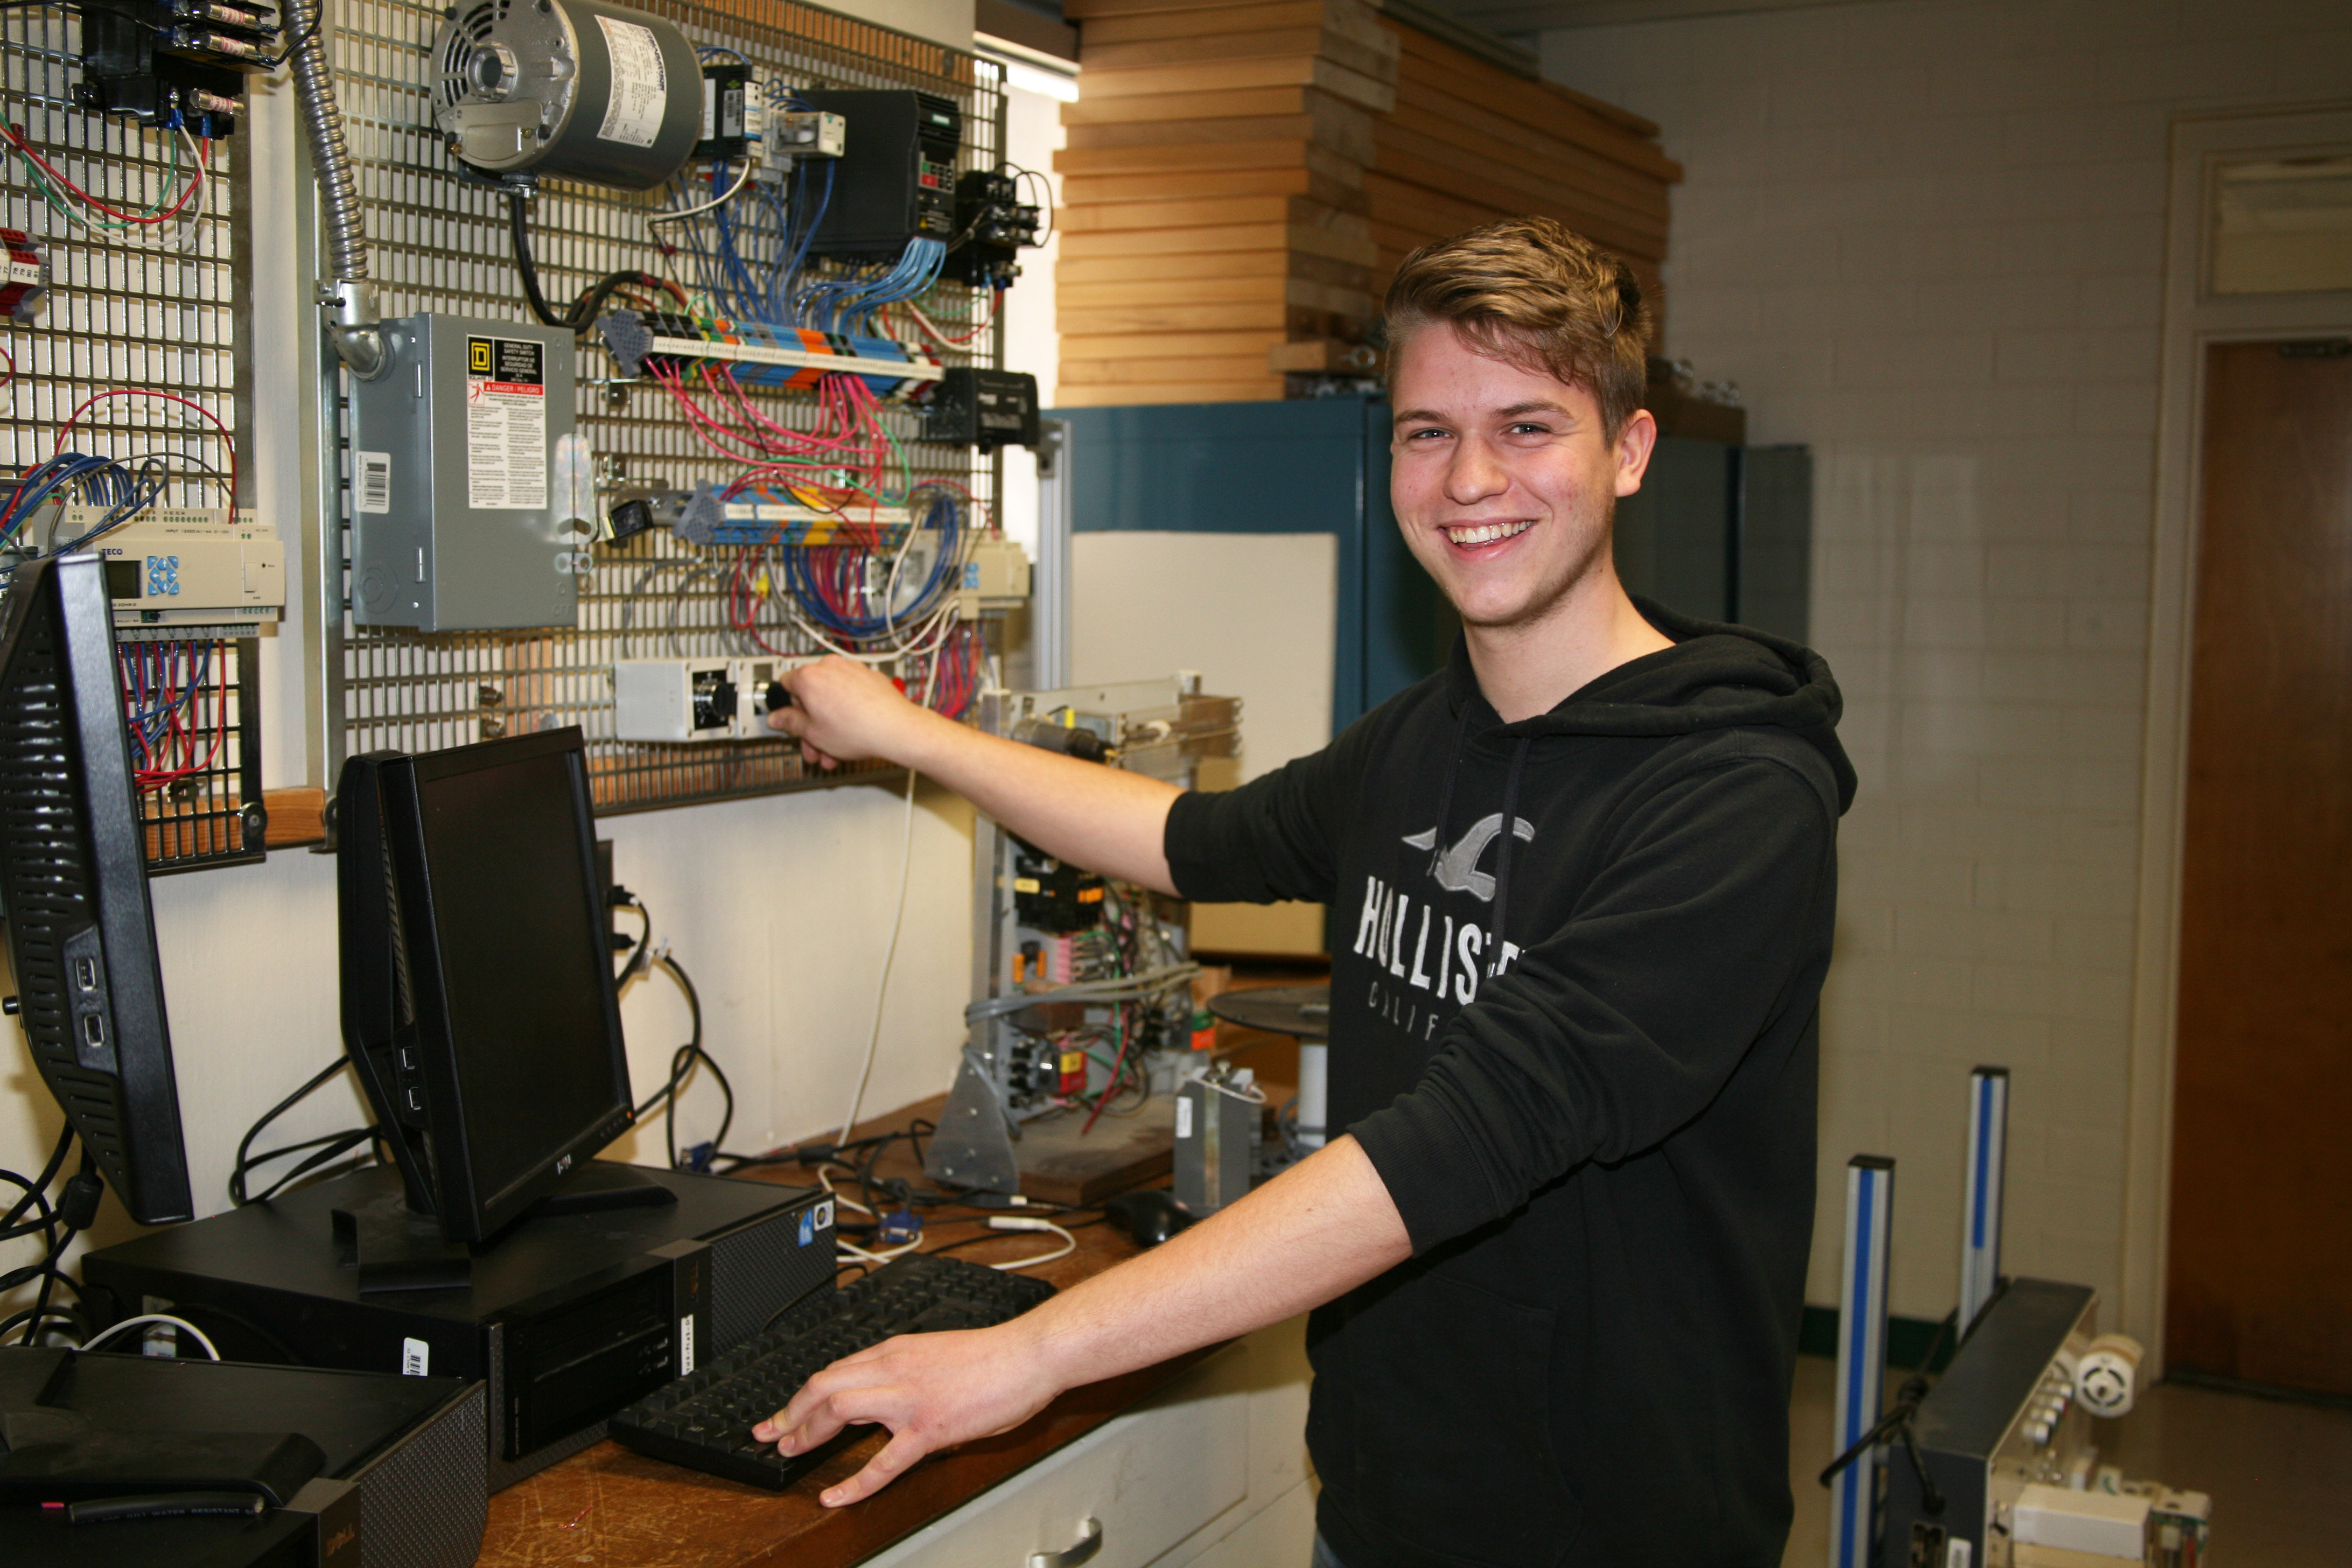 Jan Gaertner is serving an internship at Georgia Northwestern Technical College and is currently fulfilling an electronics technician apprenticeship in Germany with Hans Sporer GmbH in Rosenheim.